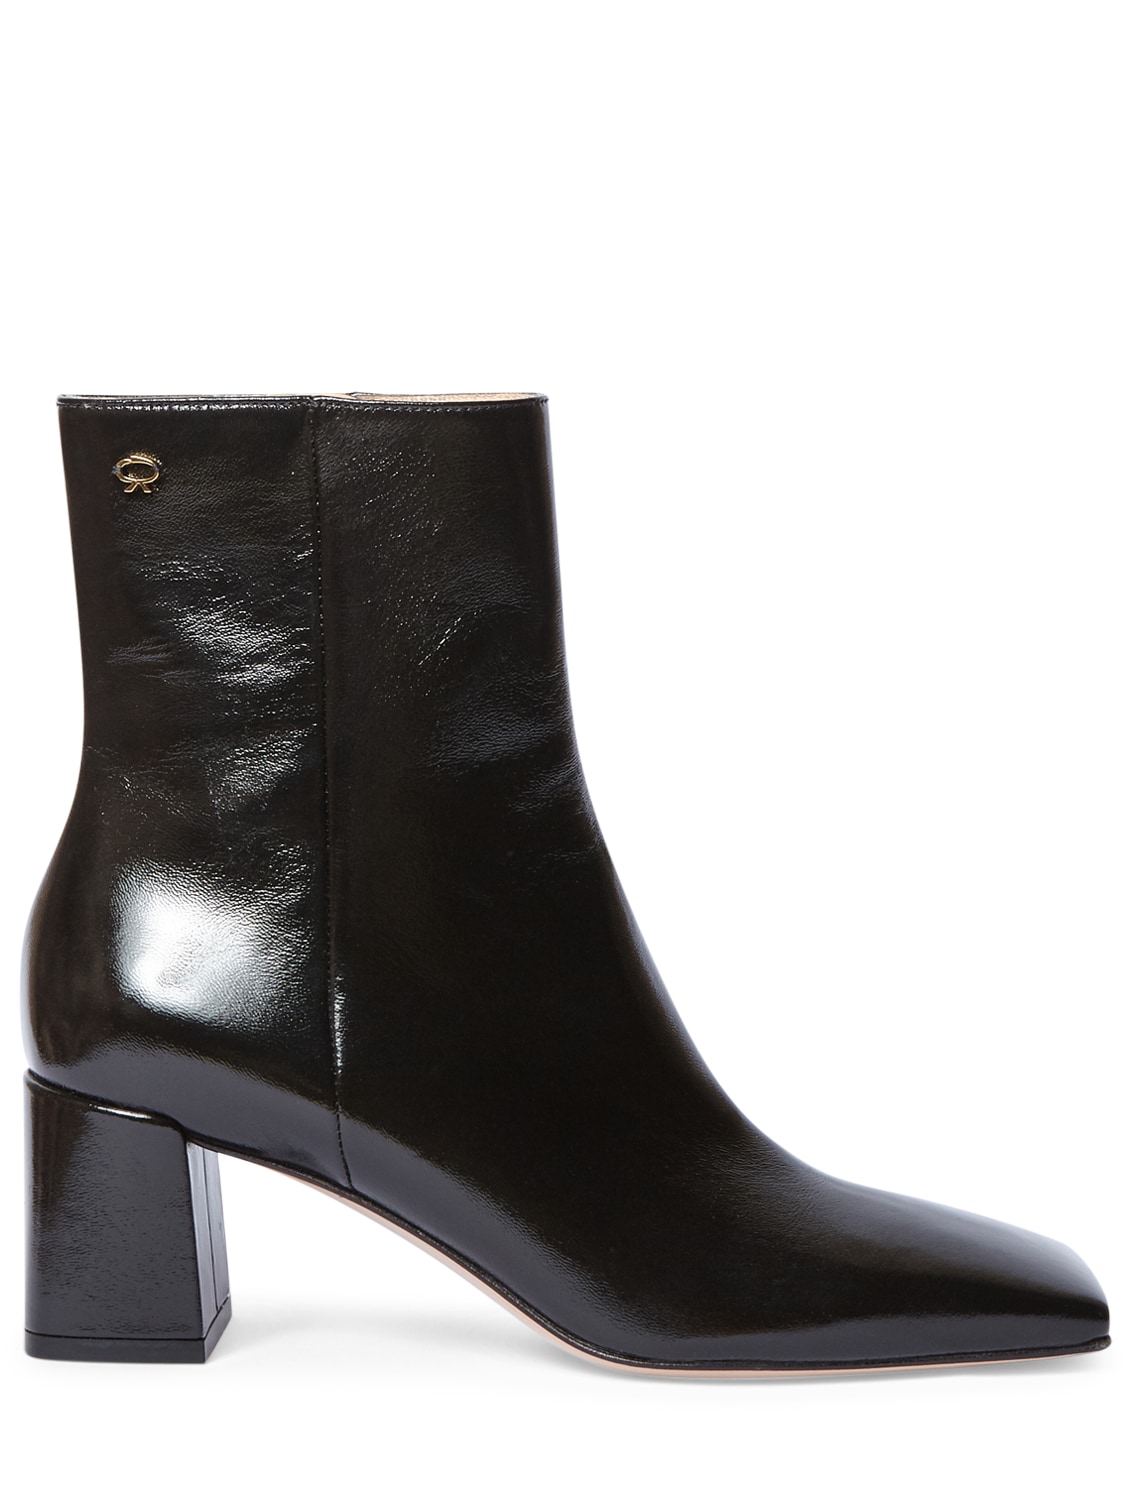 Gianvito Rossi 55mm Patent Leather Ankle Boots In Black